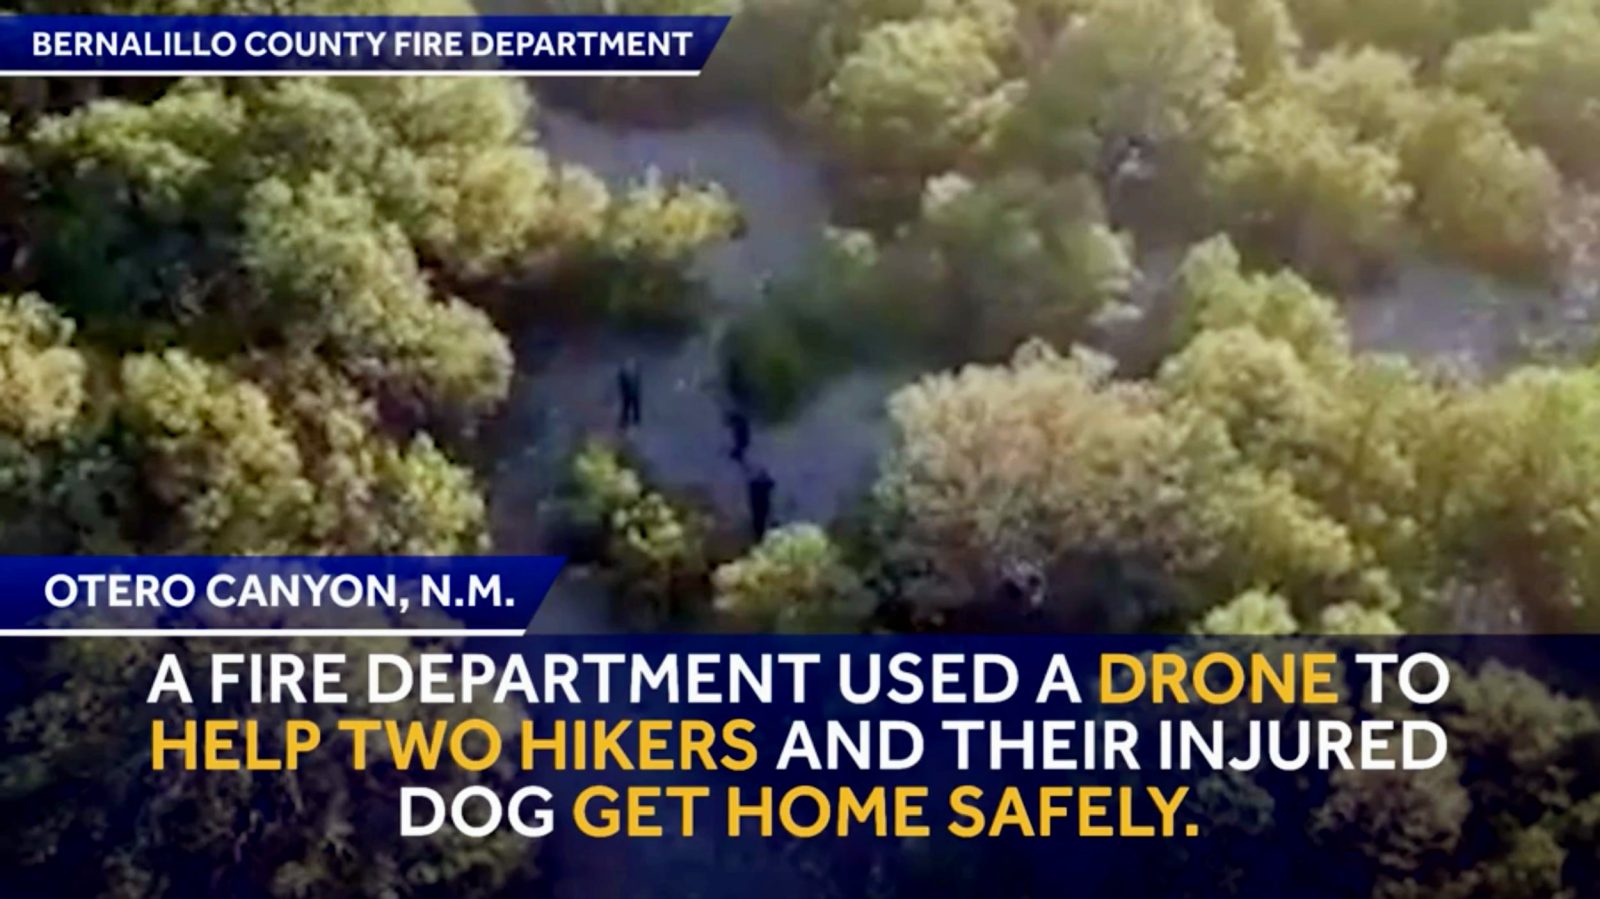 Drone leads the way to safety for stranded hikers and injured dog